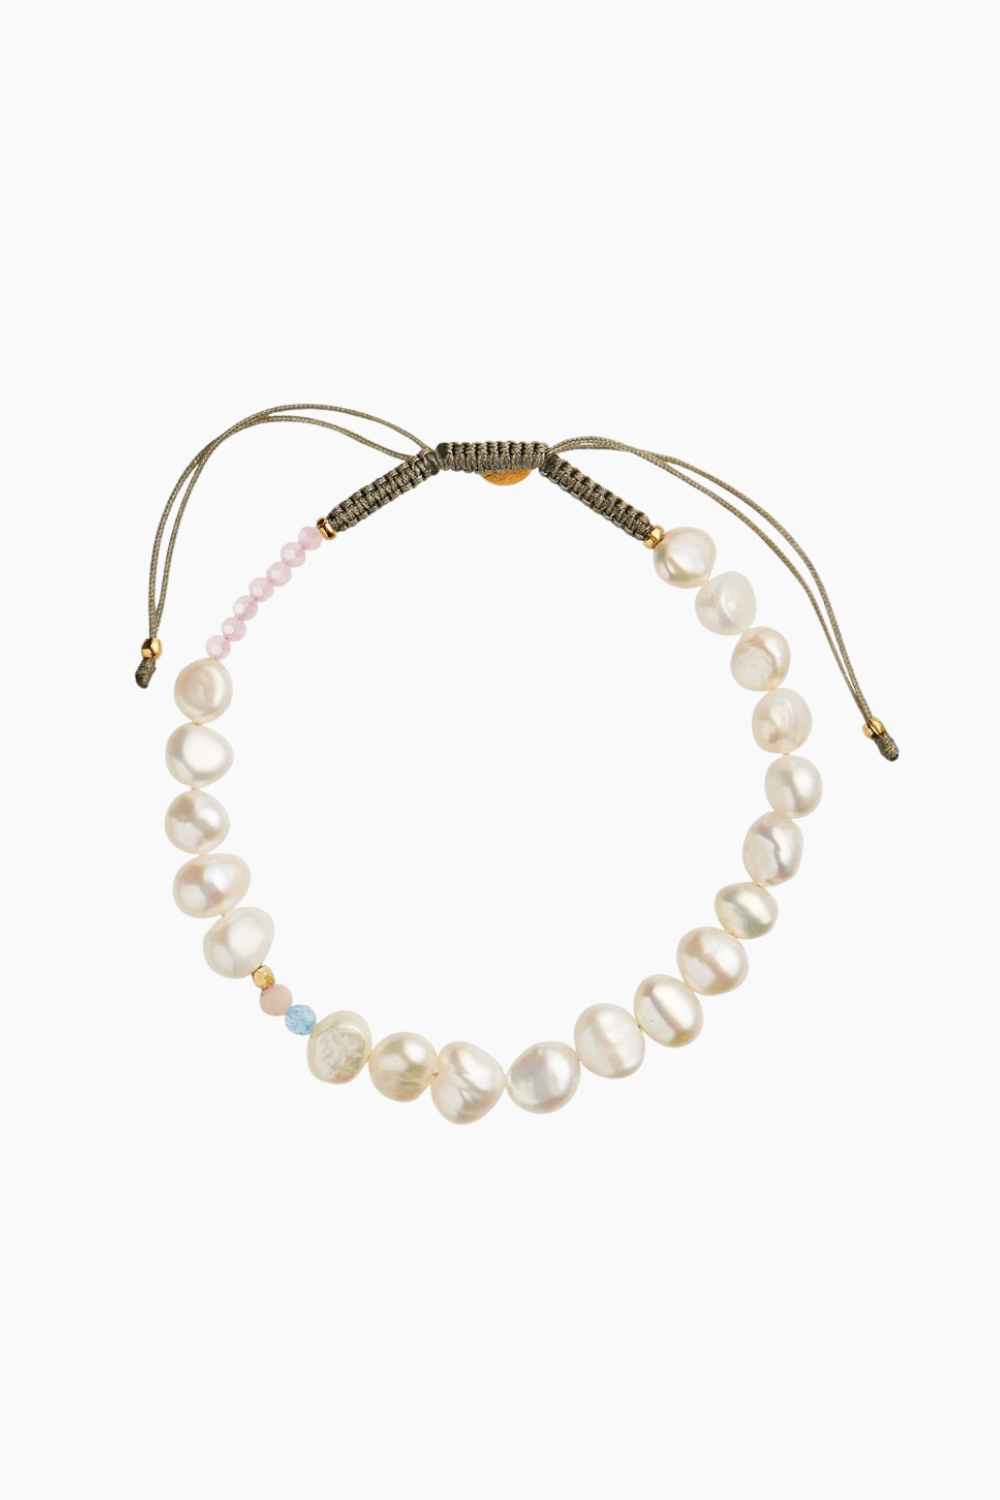 Pearlie Creme Bracelet - Blue and Pink Stone - Stine A